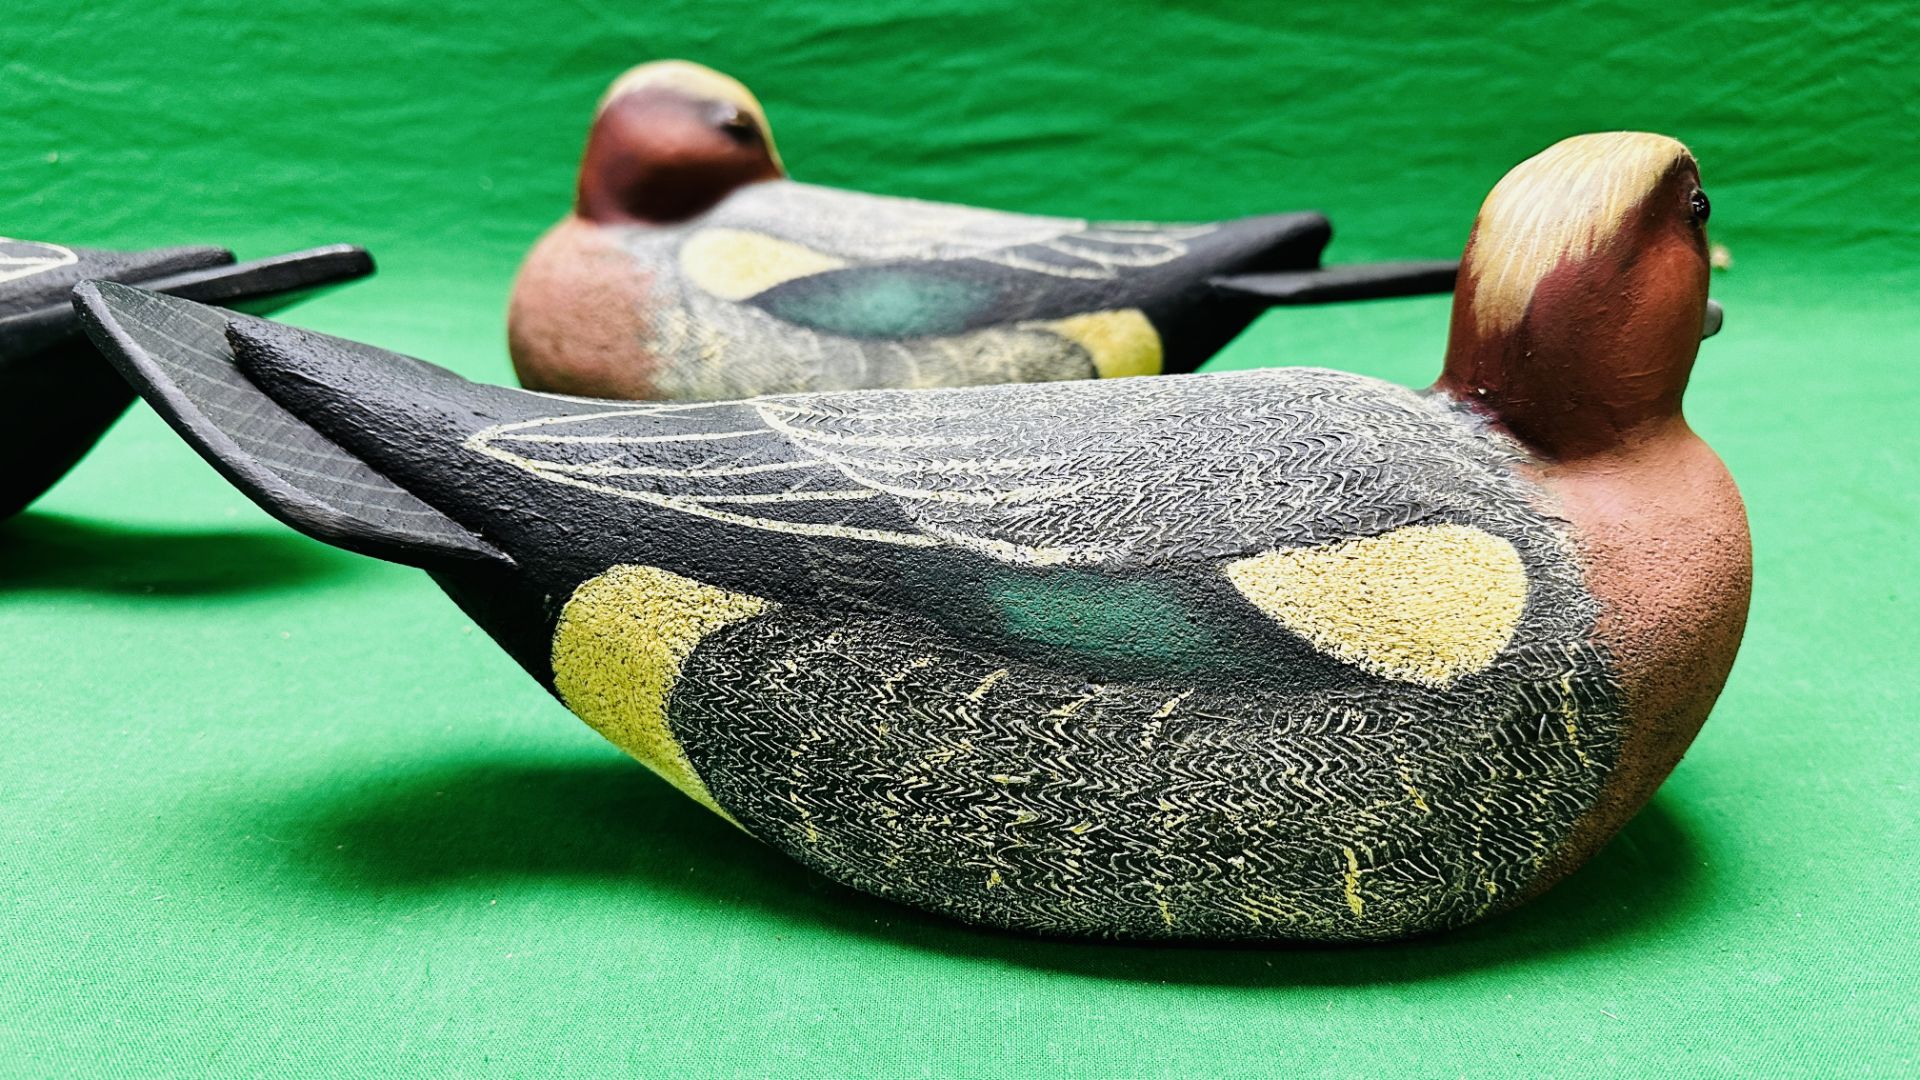 A HANDCRAFTED SET OF THREE DUCK DECOYS HAVING HANDPAINTED DETAIL AND GLASS EYES. - Image 6 of 8